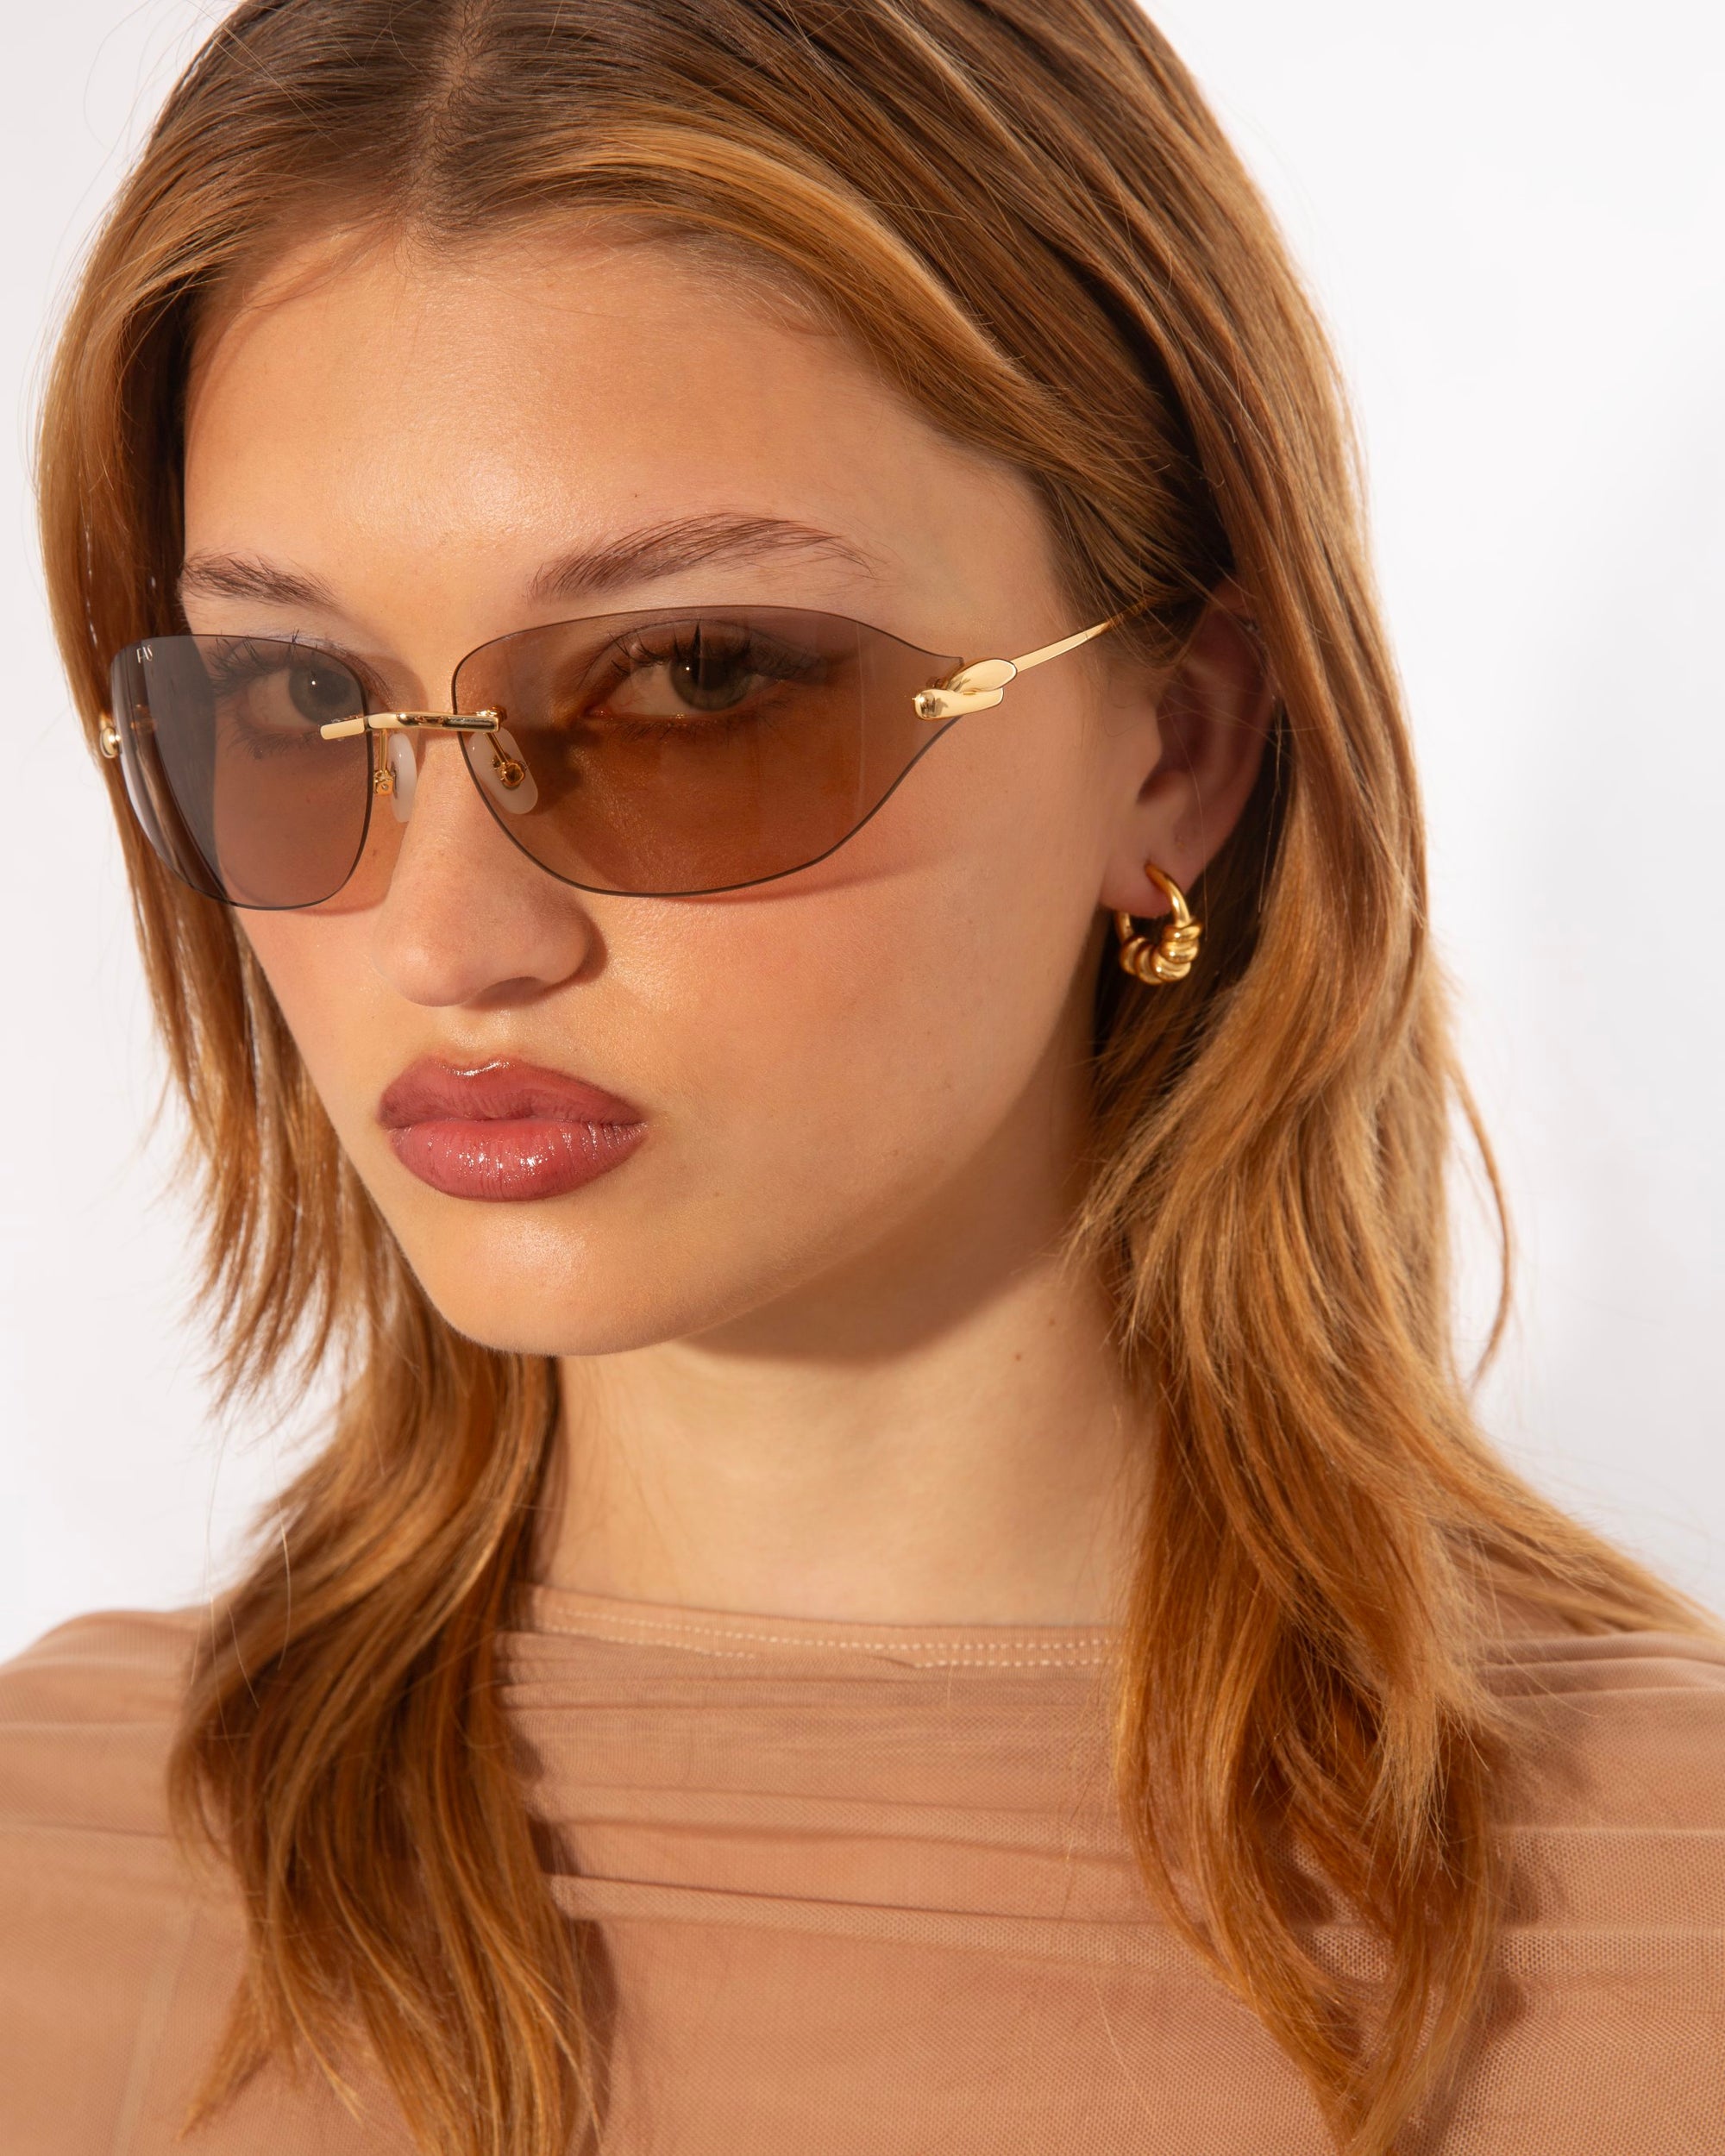 A woman with shoulder-length light brown hair is wearing stylish, For Art's Sake® Serpent I sunglasses and small gold hoop earrings. She is dressed in a light brown sheer top and is posing against a plain white background.